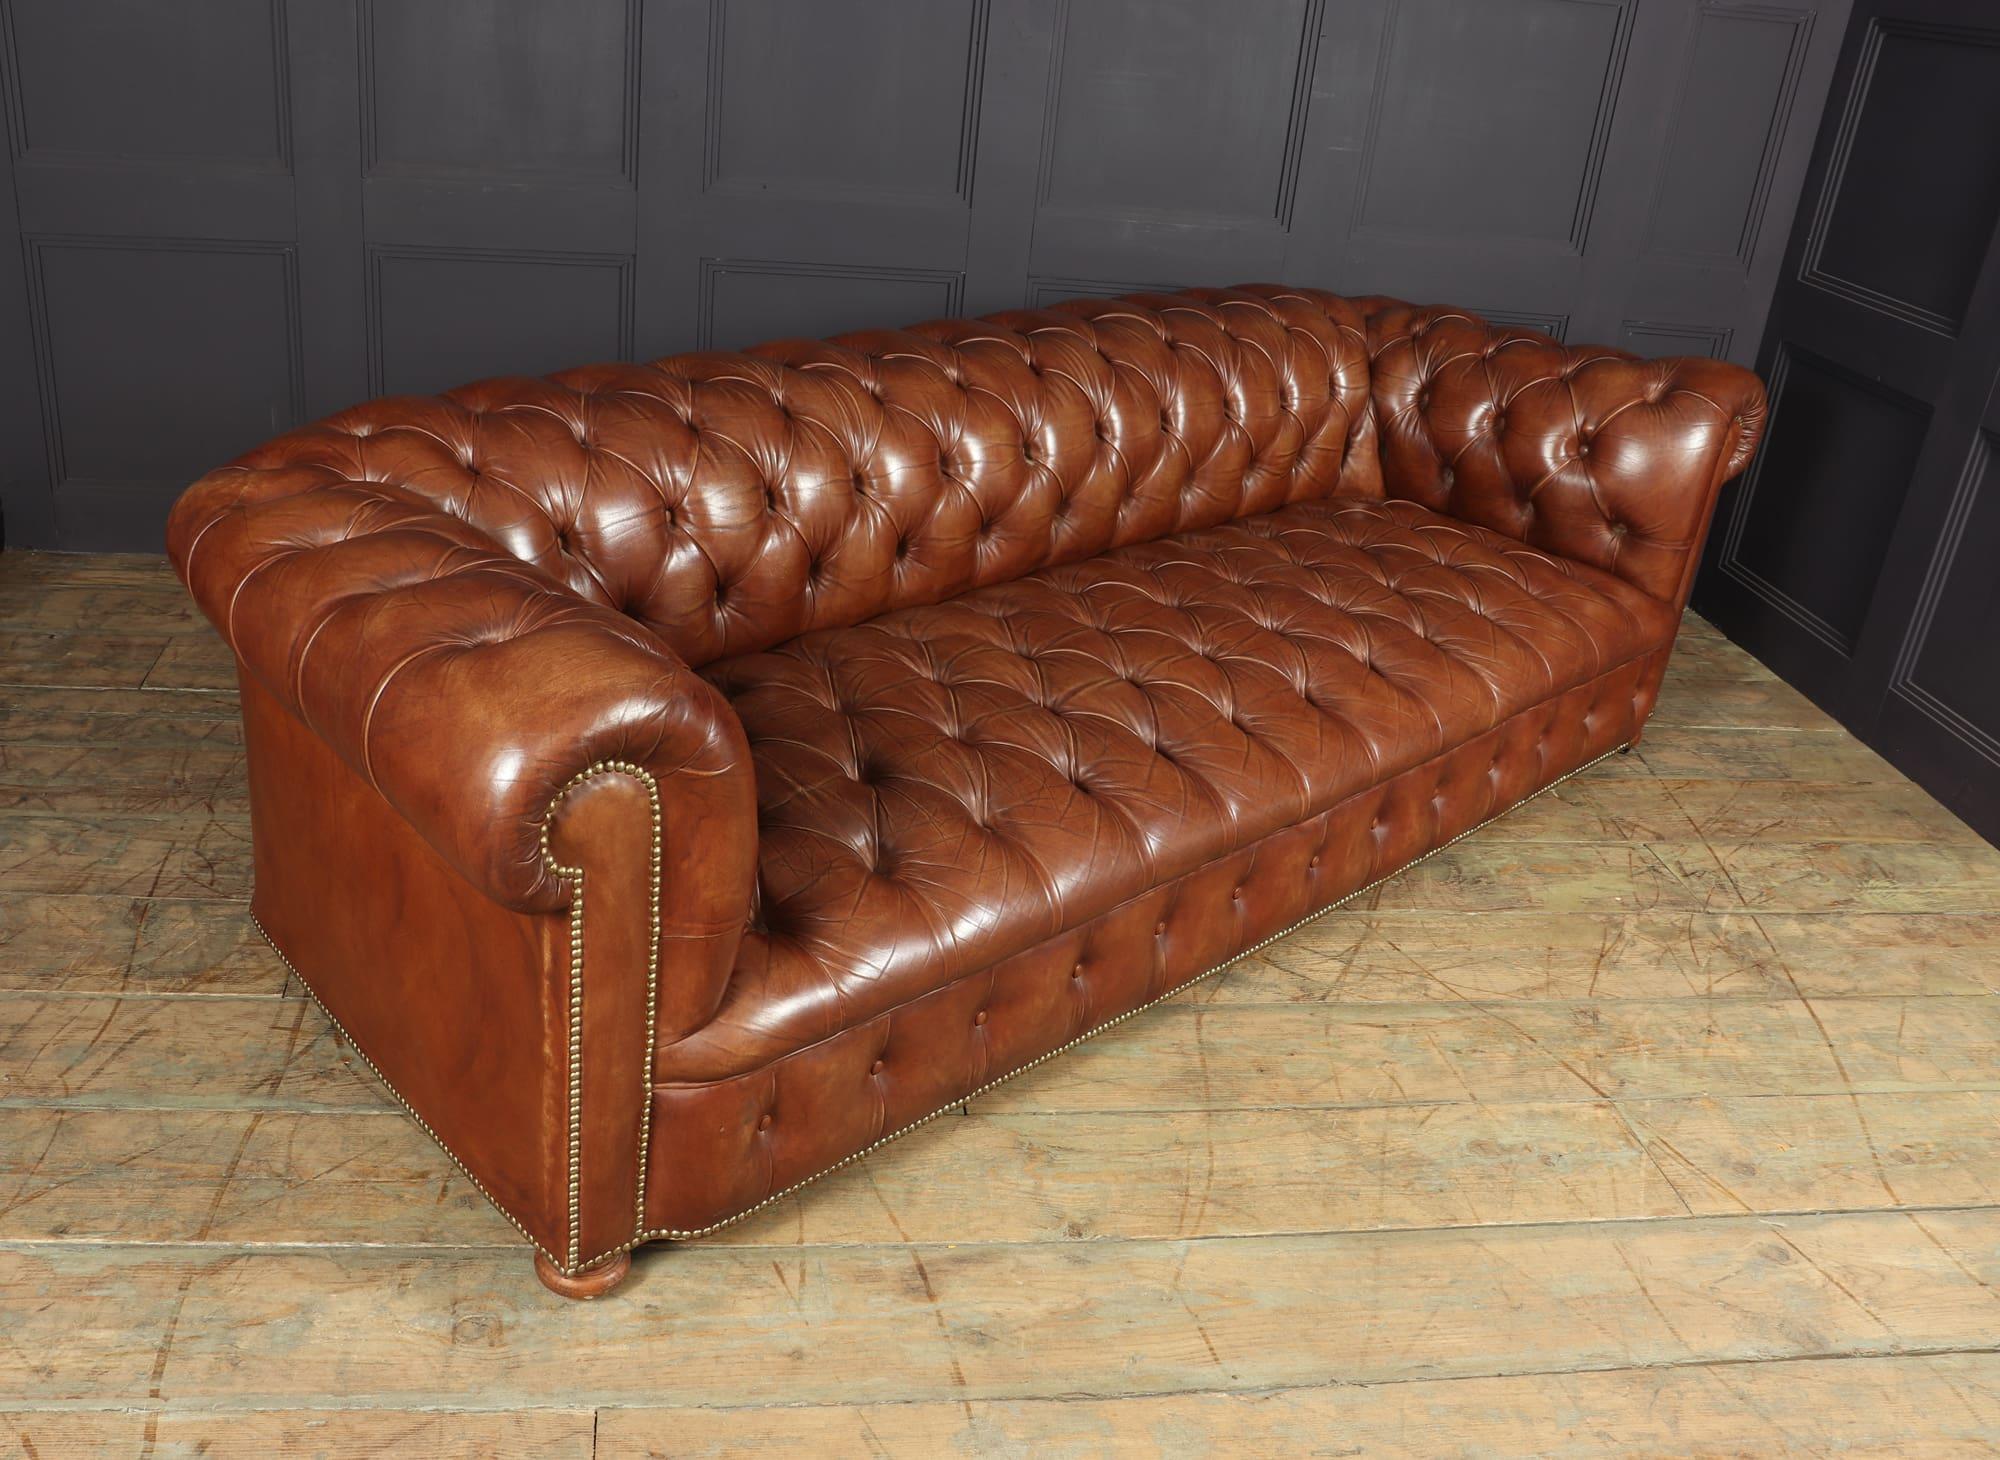 Mid-20th Century Vintage Leather Chesterfield Sofa 4 seat